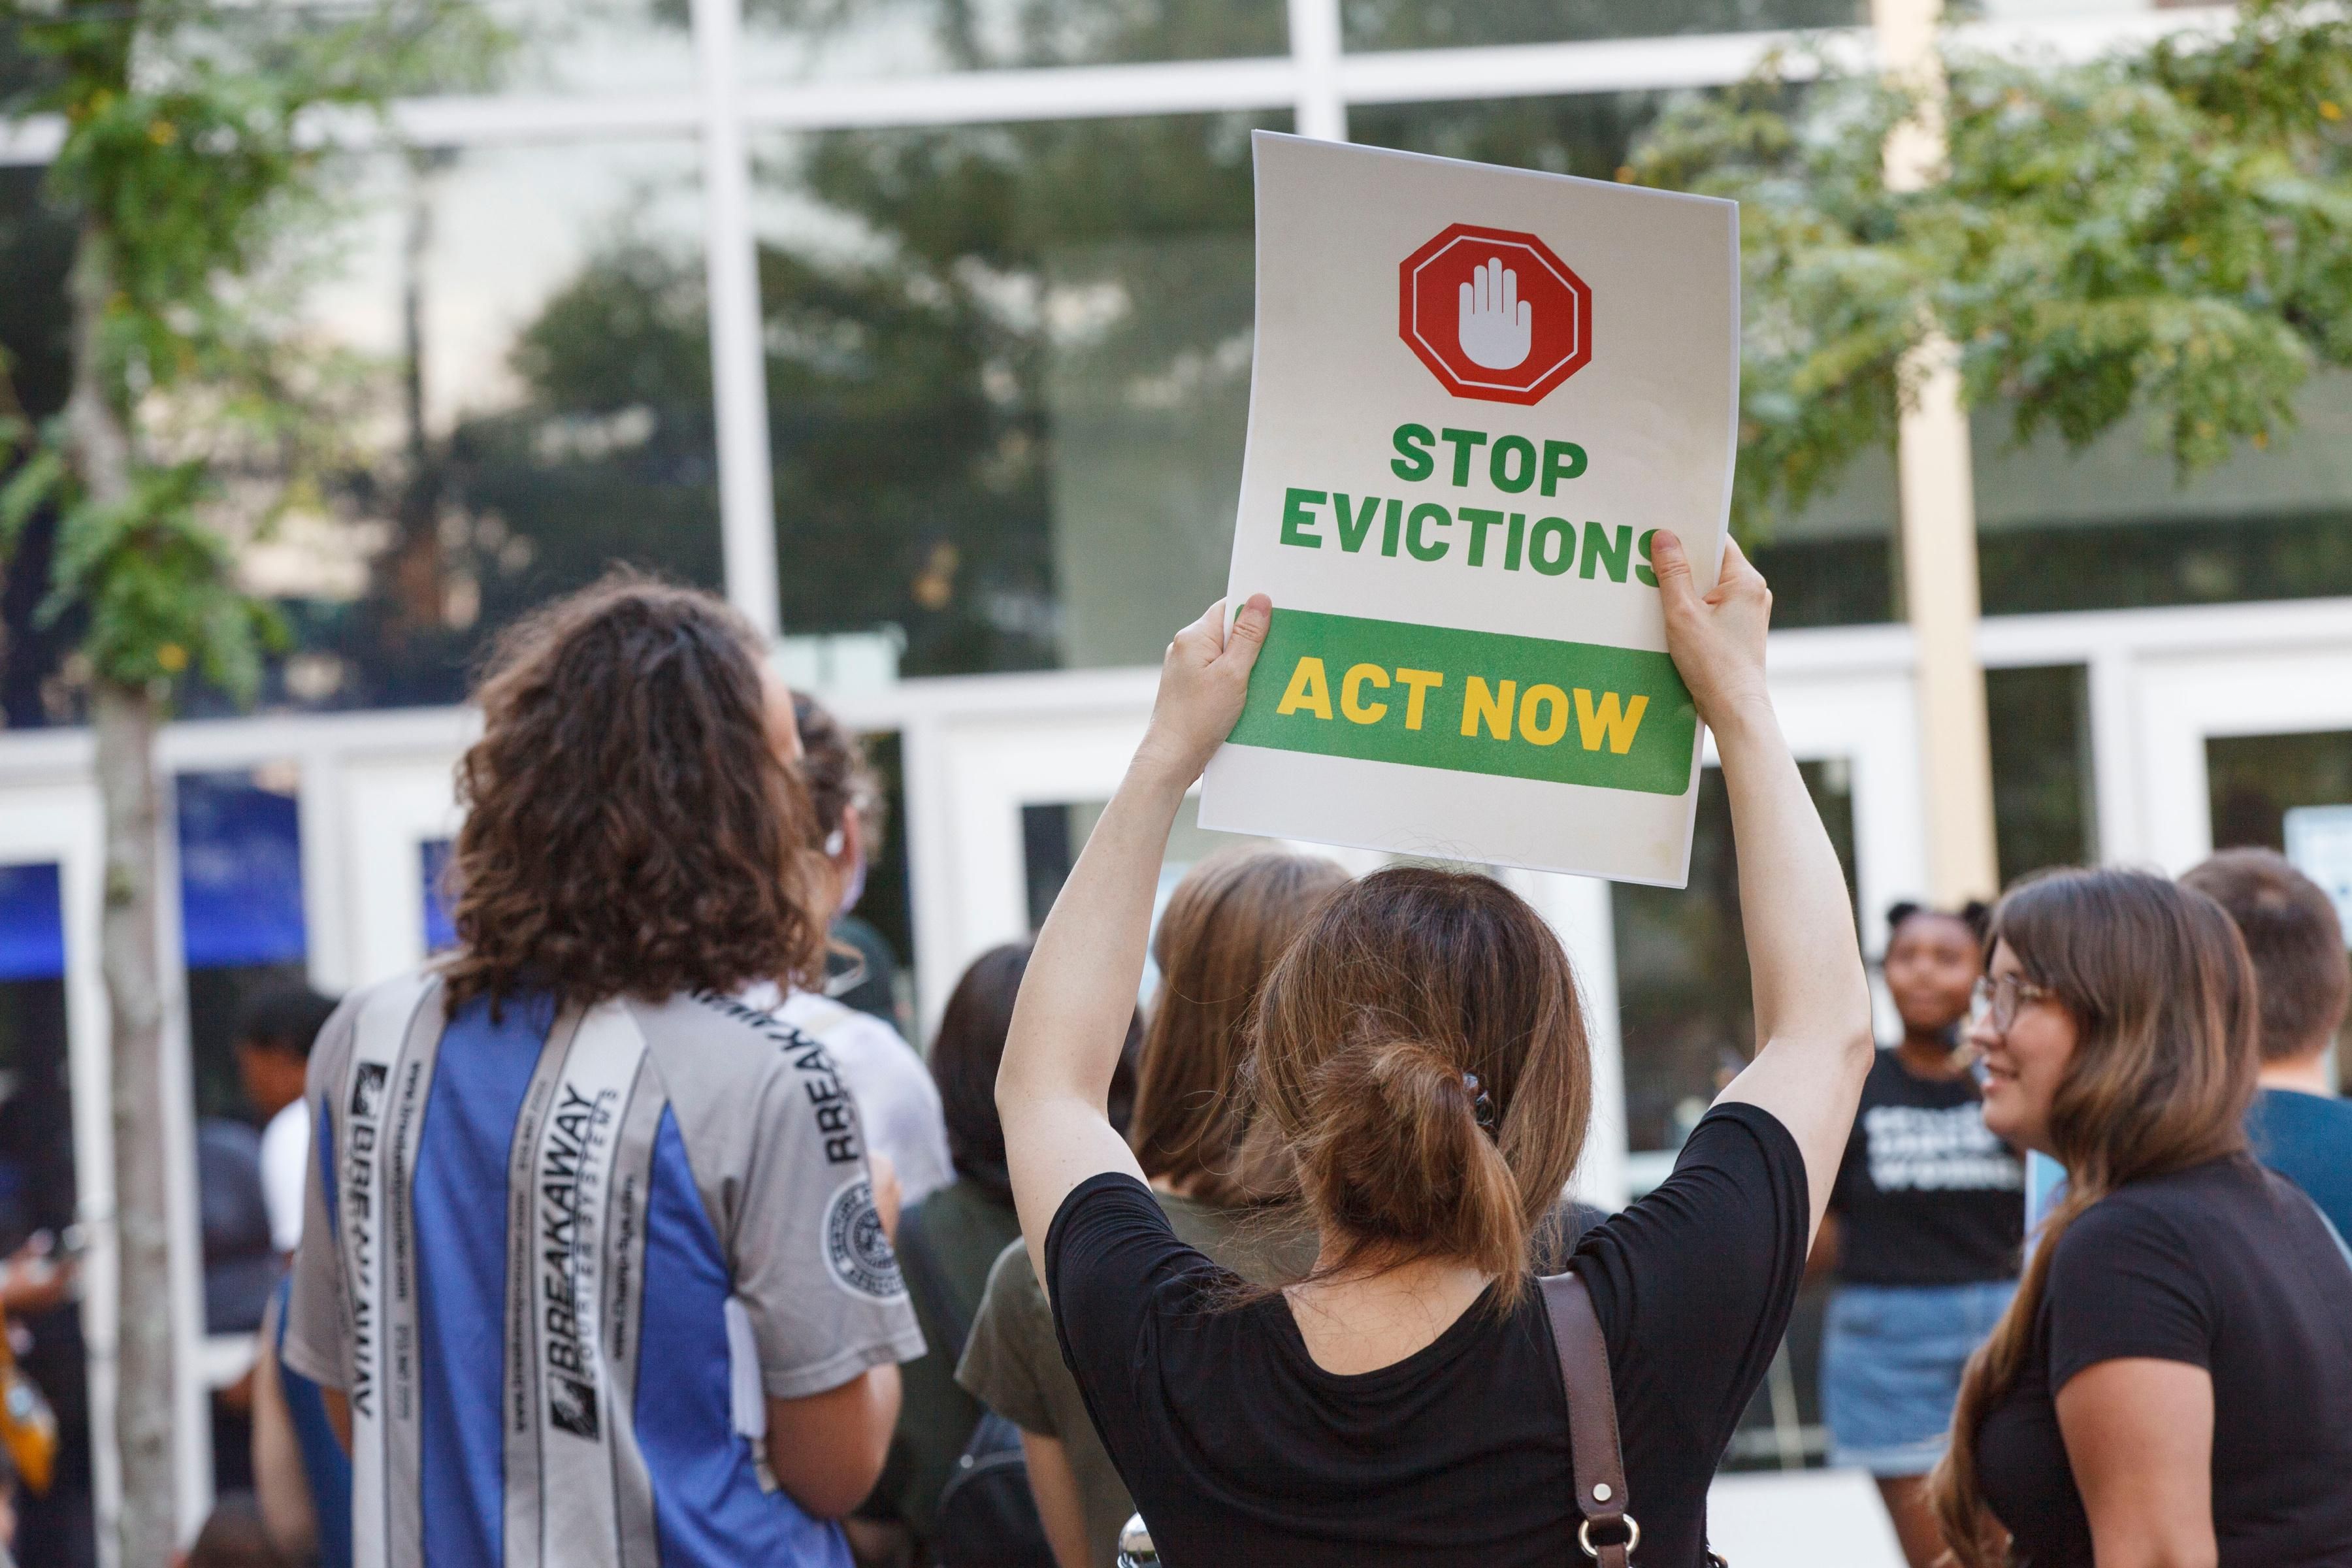 A protester demands an end to evictions